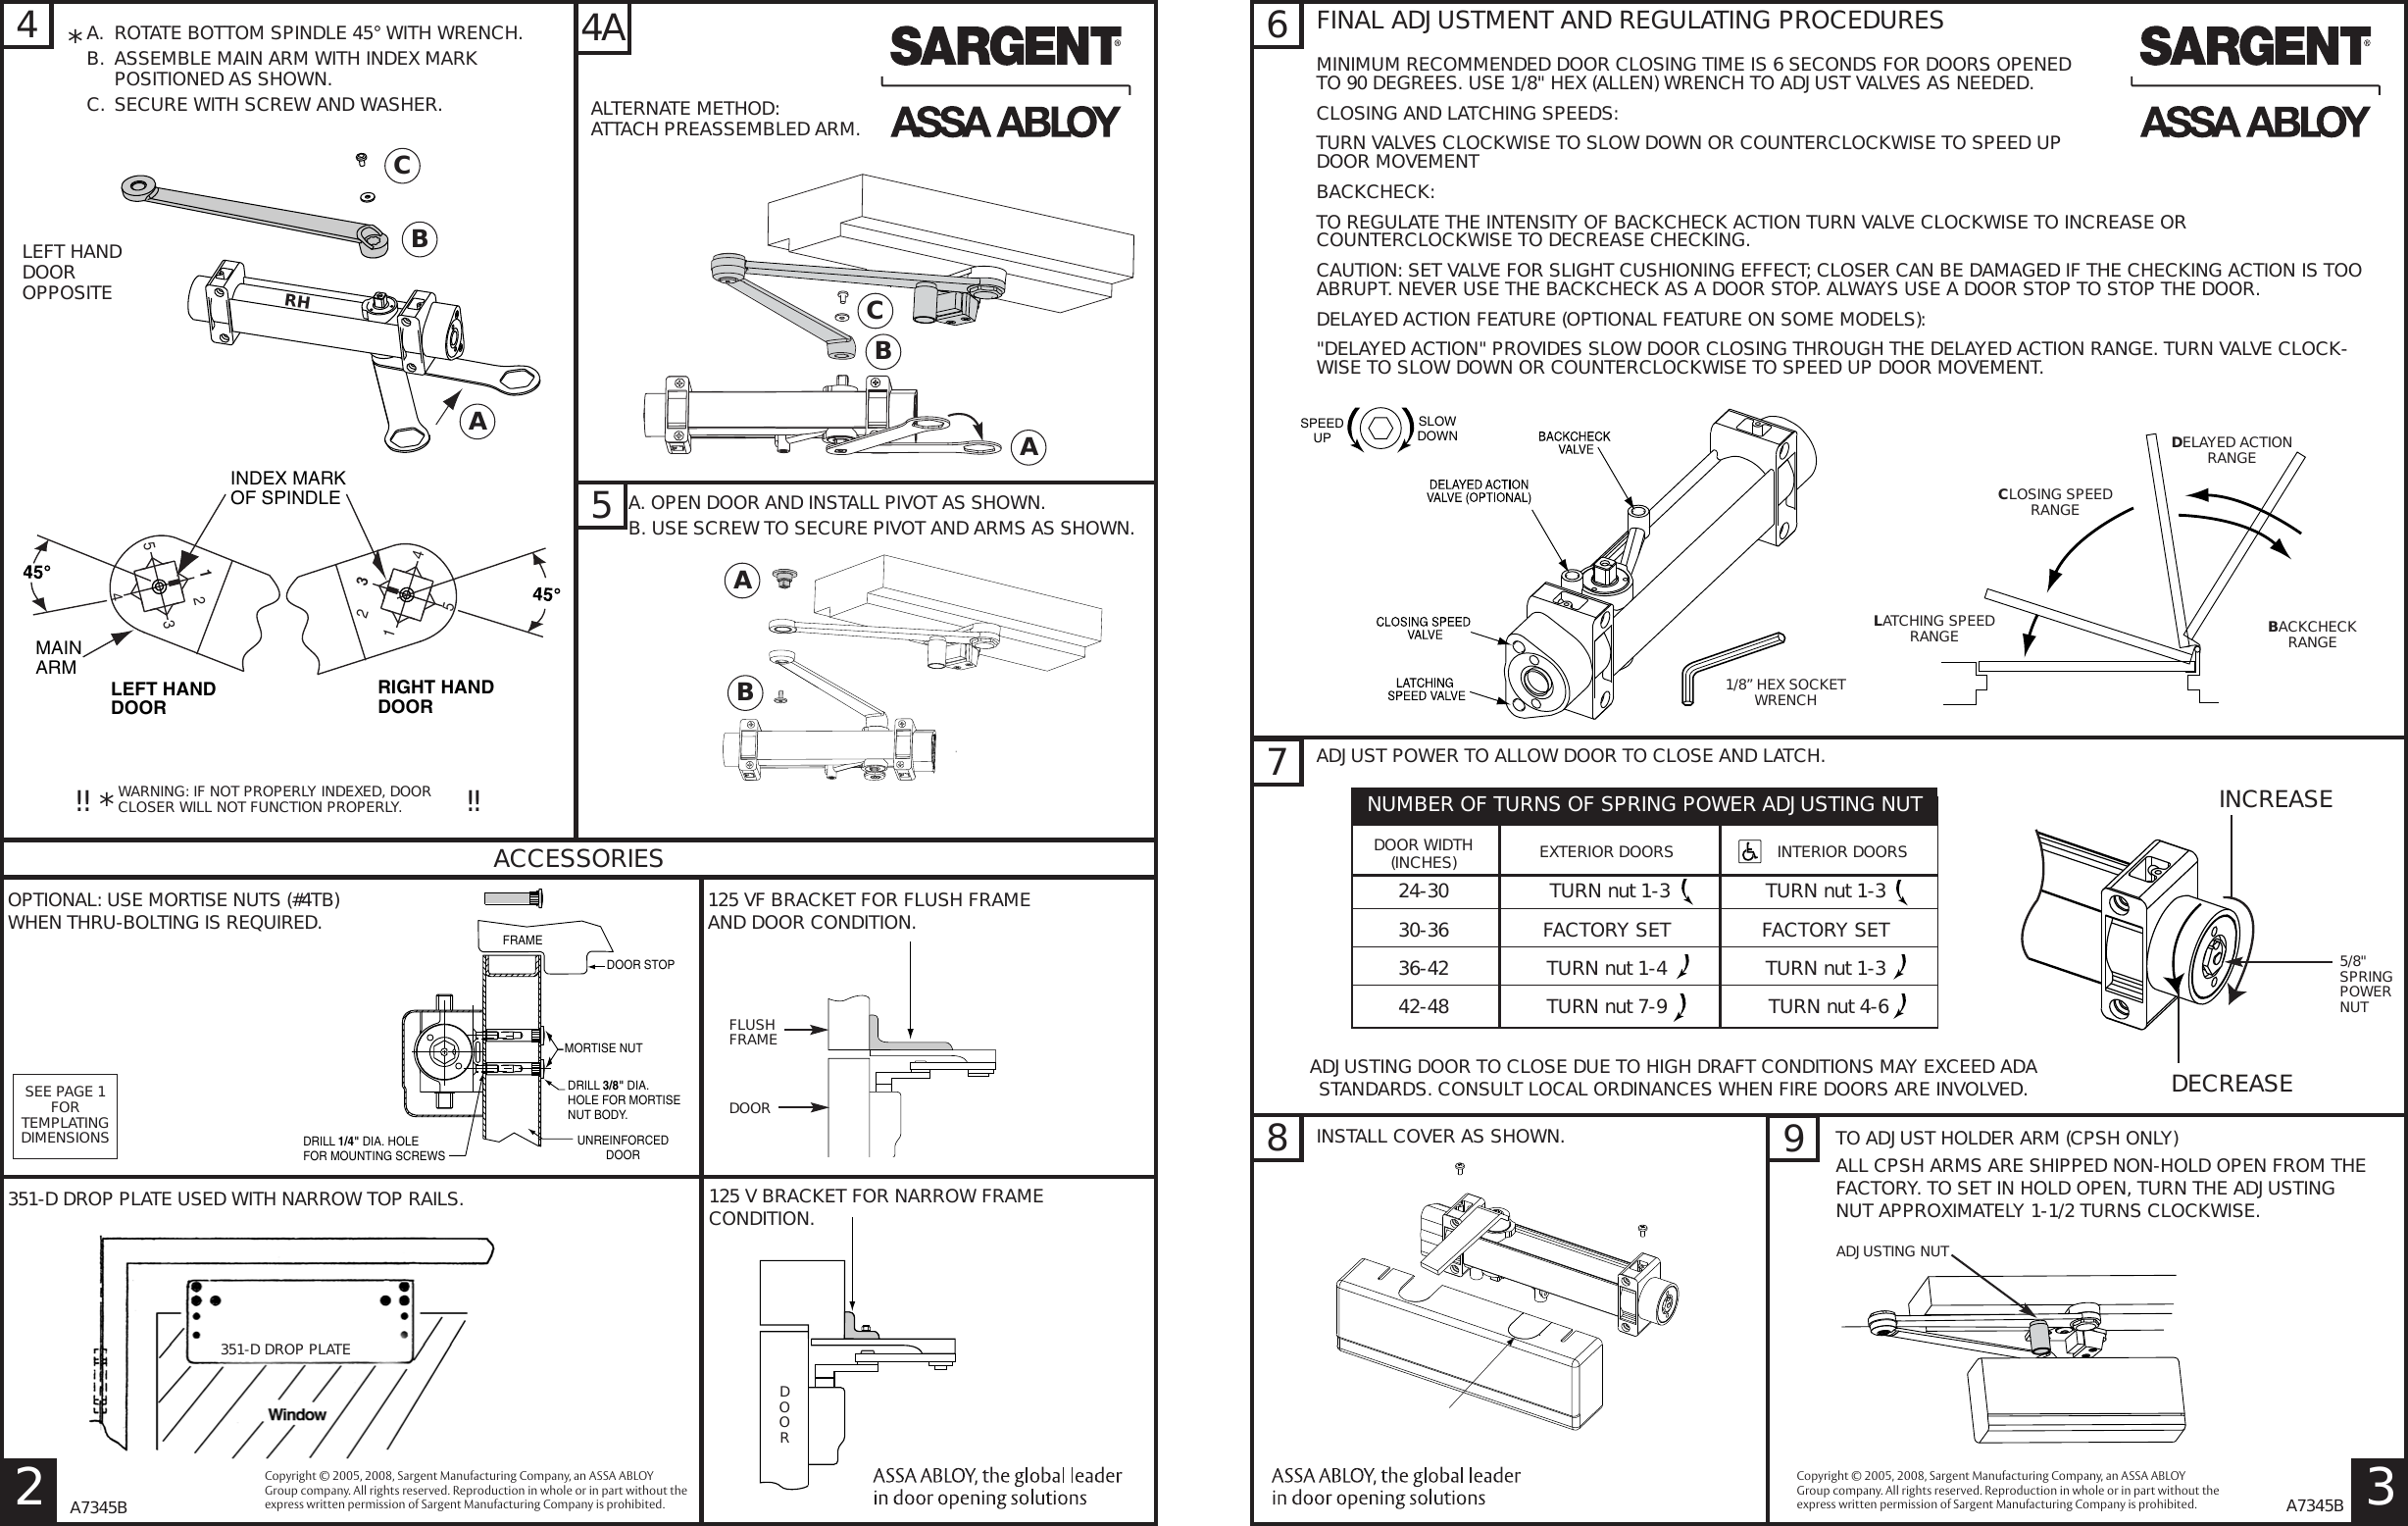 Page 3 of 4 - Sargent 351 Series Door Closers With CPS & CPSH Holder Arms Installation Instructions A7345